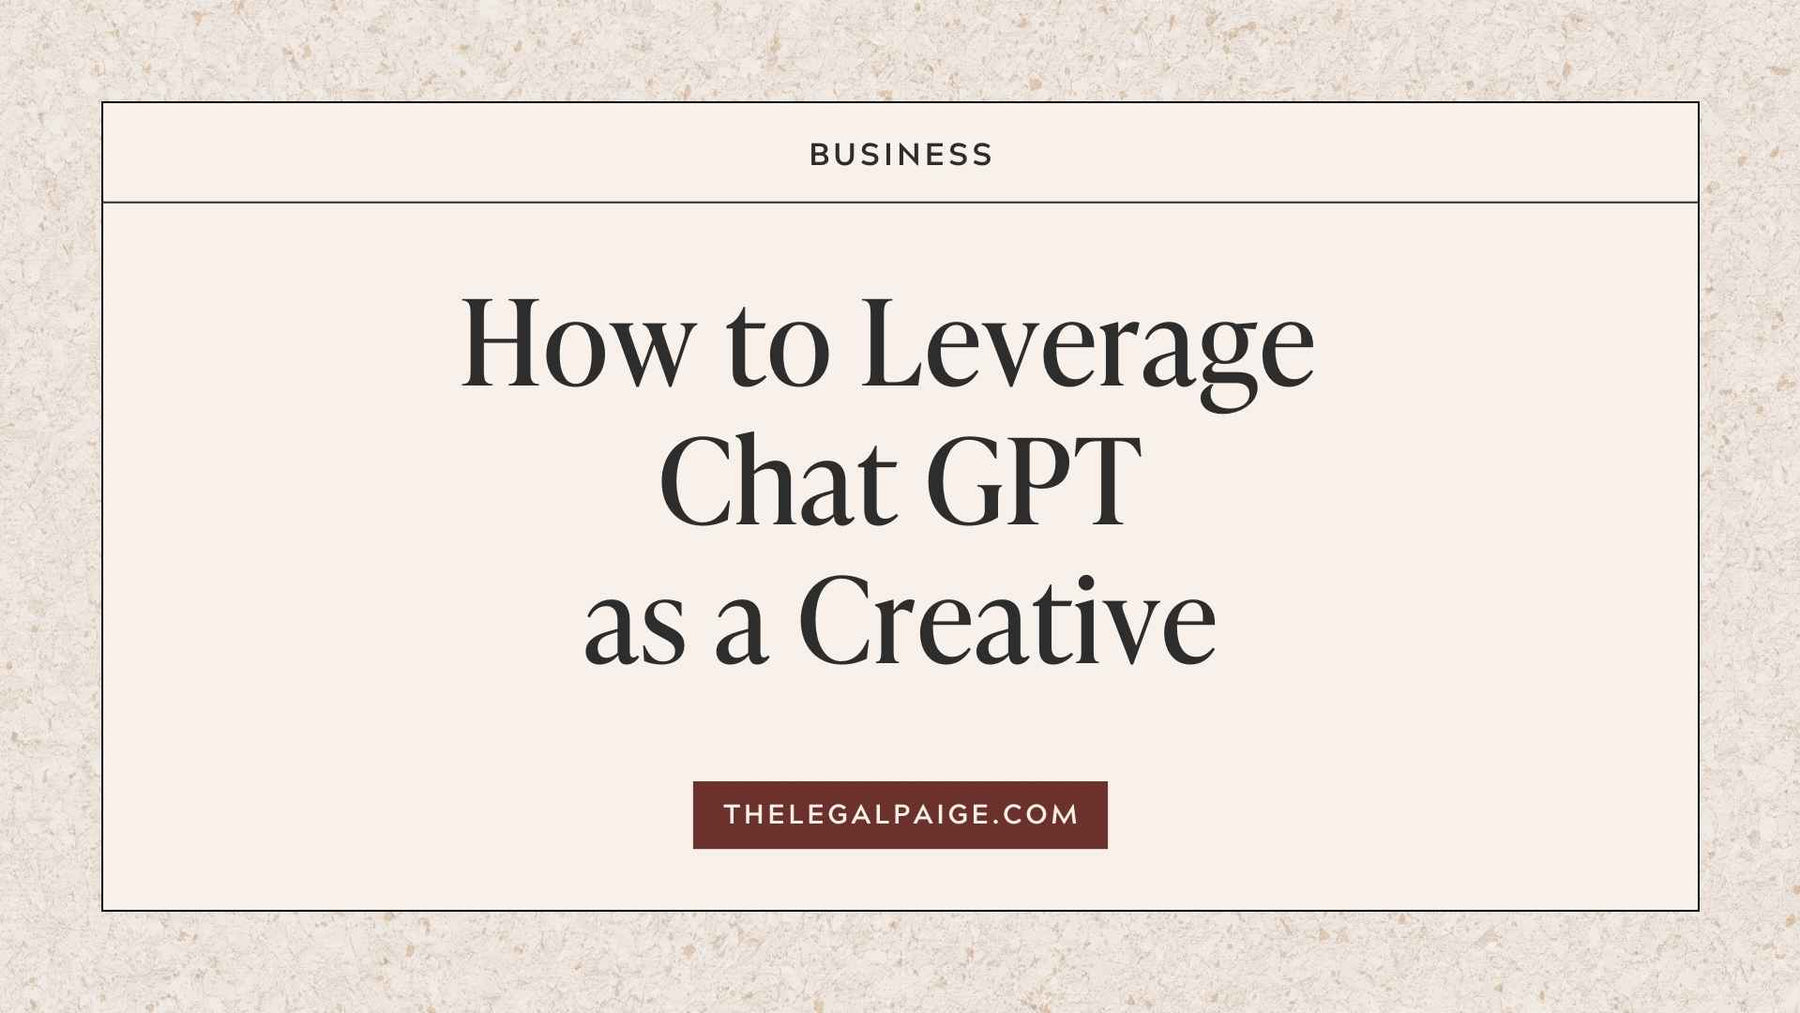 How to Leverage Chat GPT as a Creative